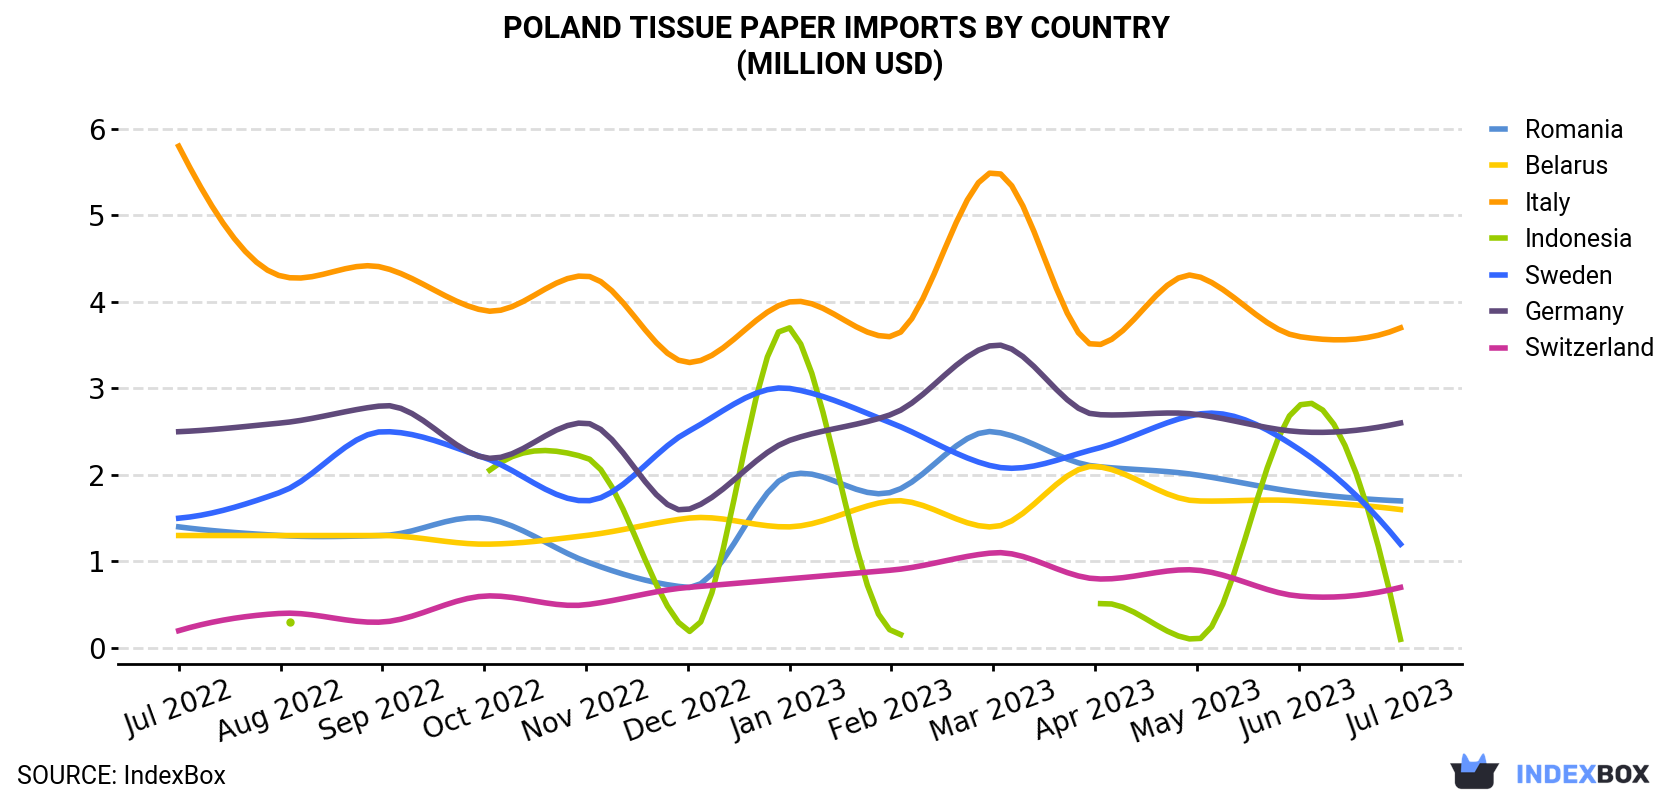 Poland Tissue Paper Imports By Country (Million USD)